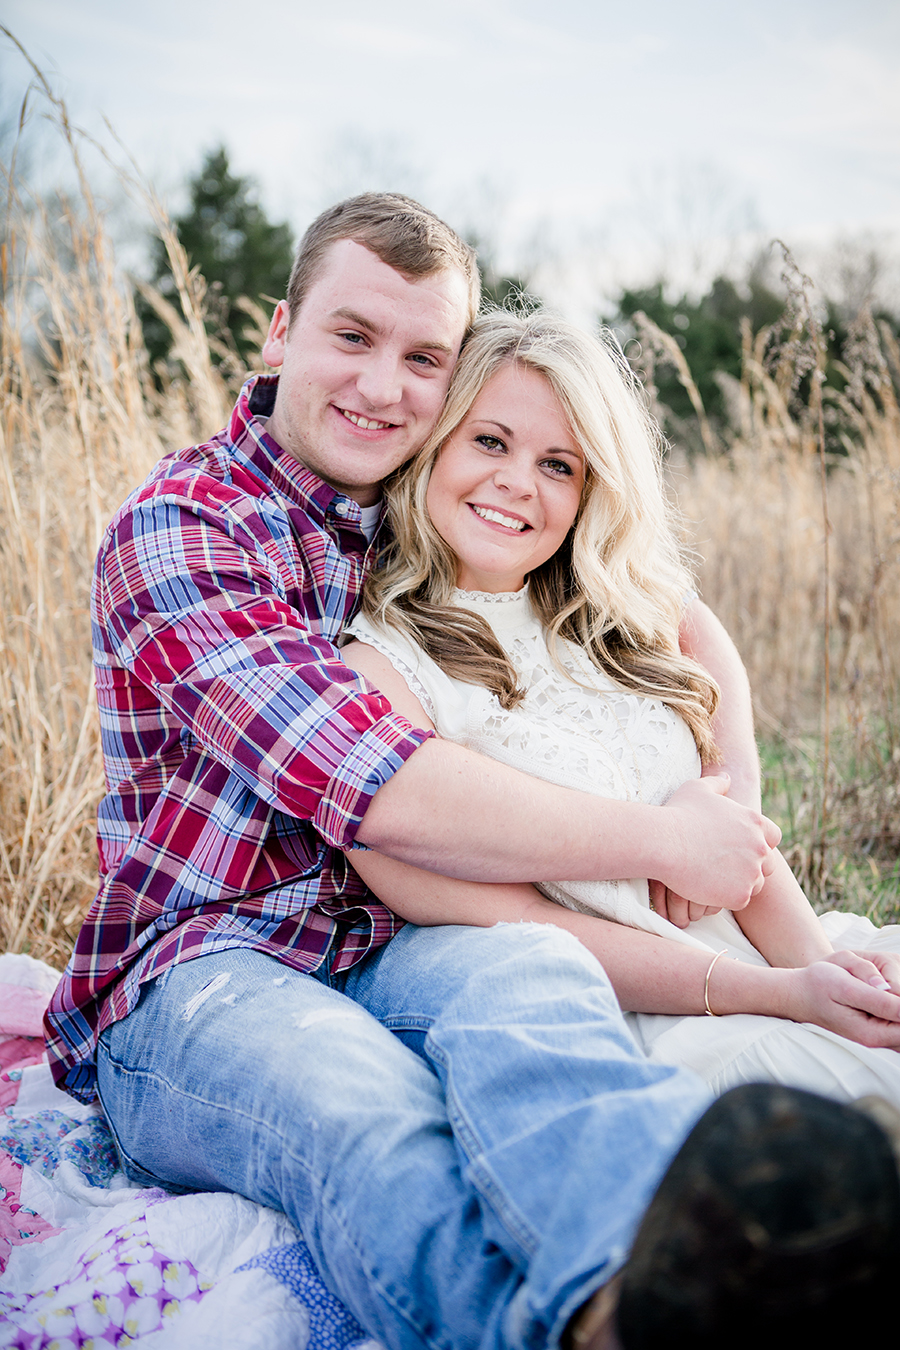 Sitting on a blanket leaning back against his chest engagement photo by Knoxville Wedding Photographer, Amanda May Photos.